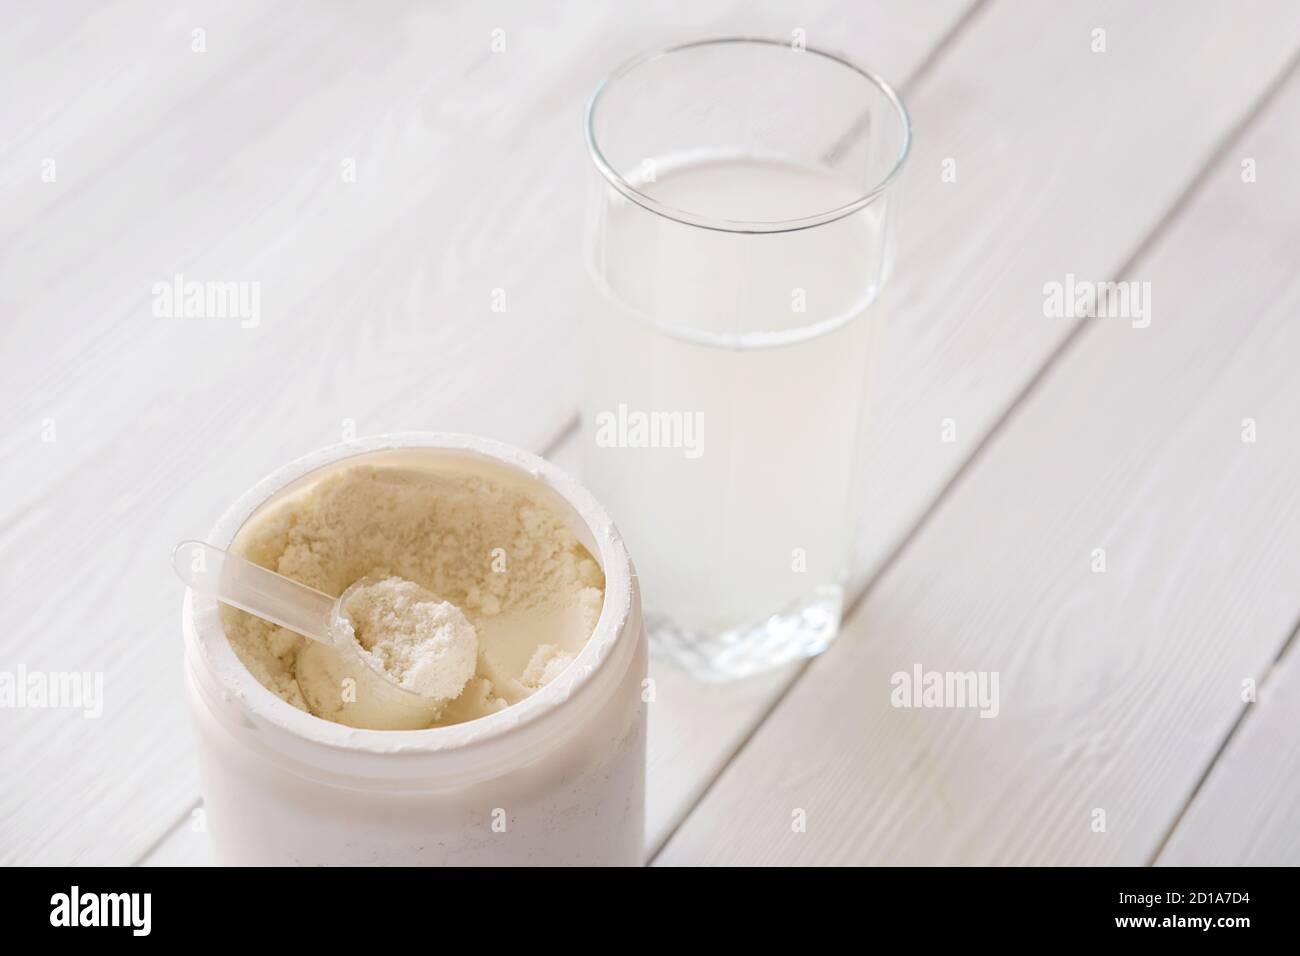 How to Mix Collagen Powder with Water